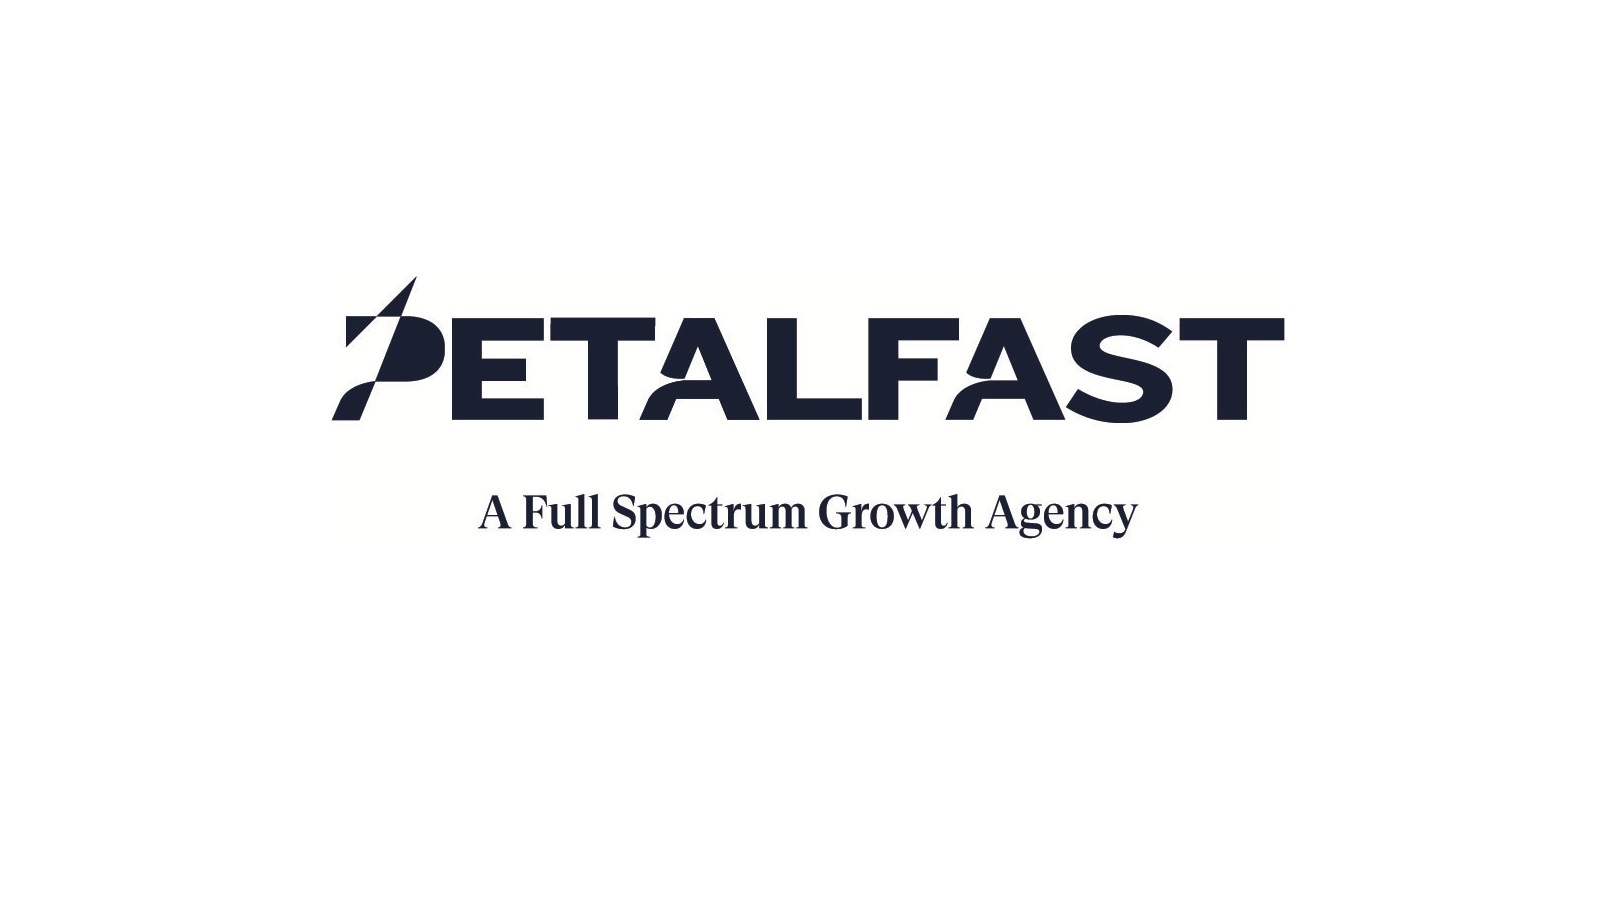 Petalfast, Cannabis Sales And Marketing Agency, Raises $2.8M In Round Led By Merida Capital